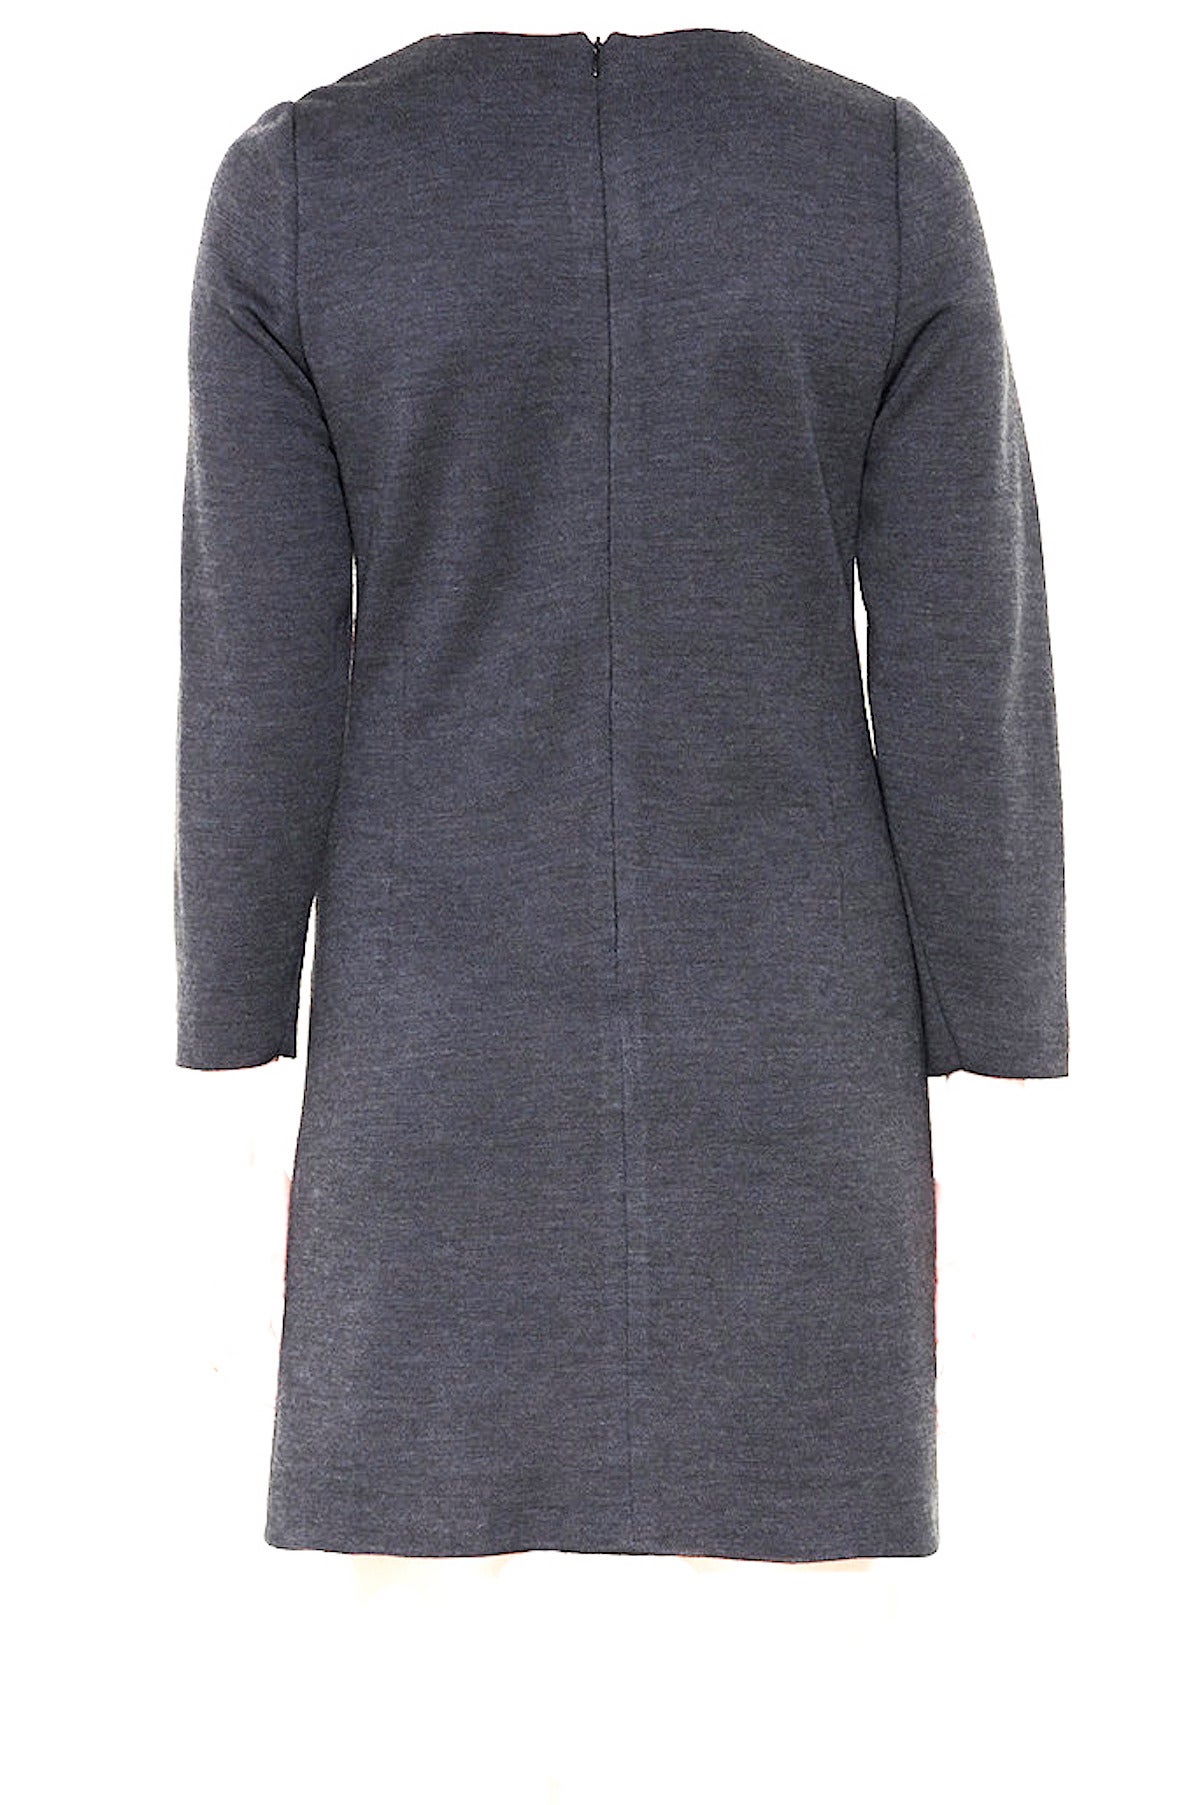 Pierre Cardin iconic mod gray wool mini dress with long sleeves and red diagonal stripes. Back zipper closure.